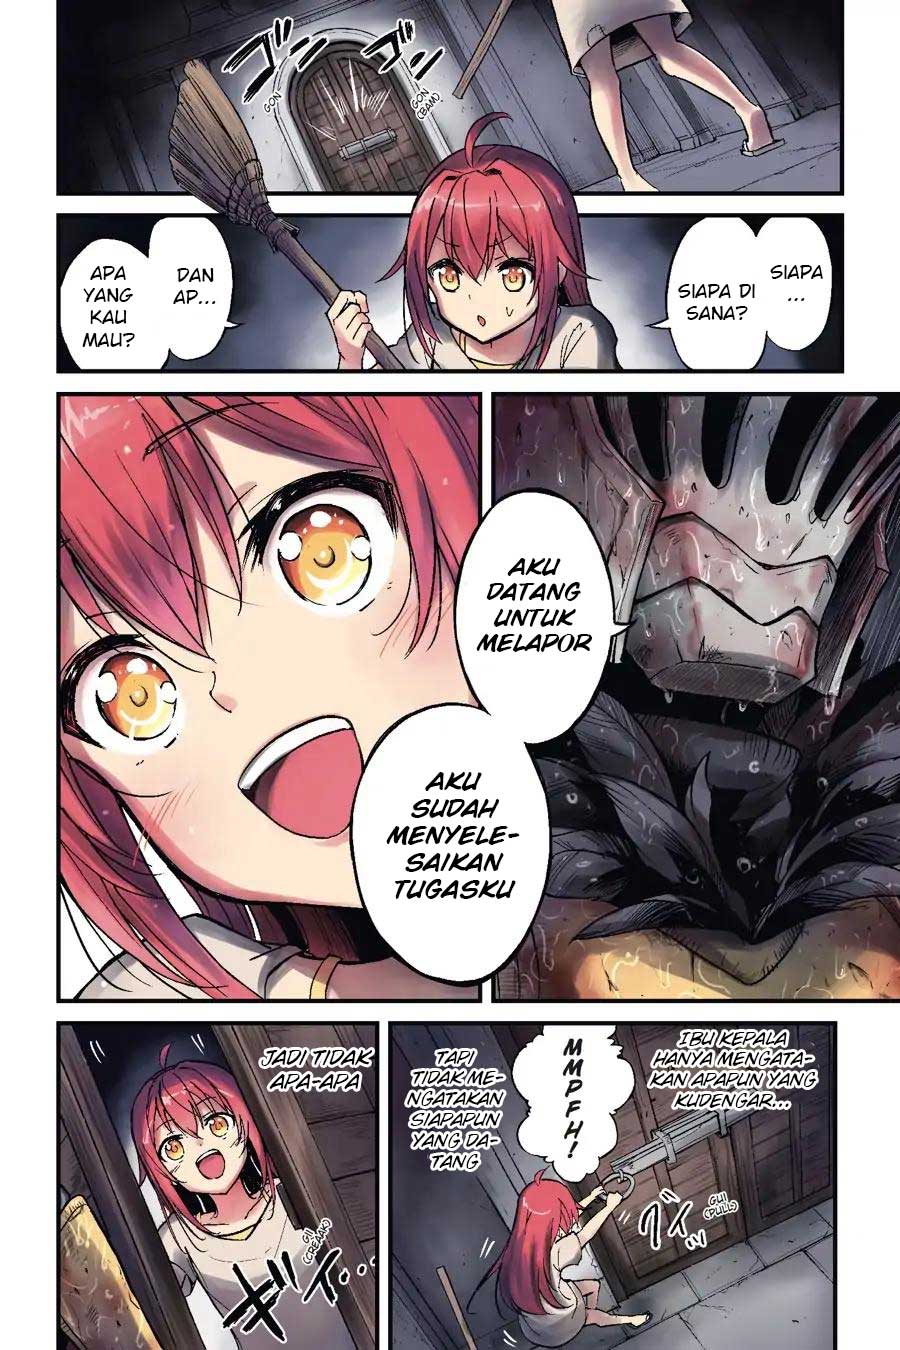 Goblin Slayer: Side Story Year One Chapter 19